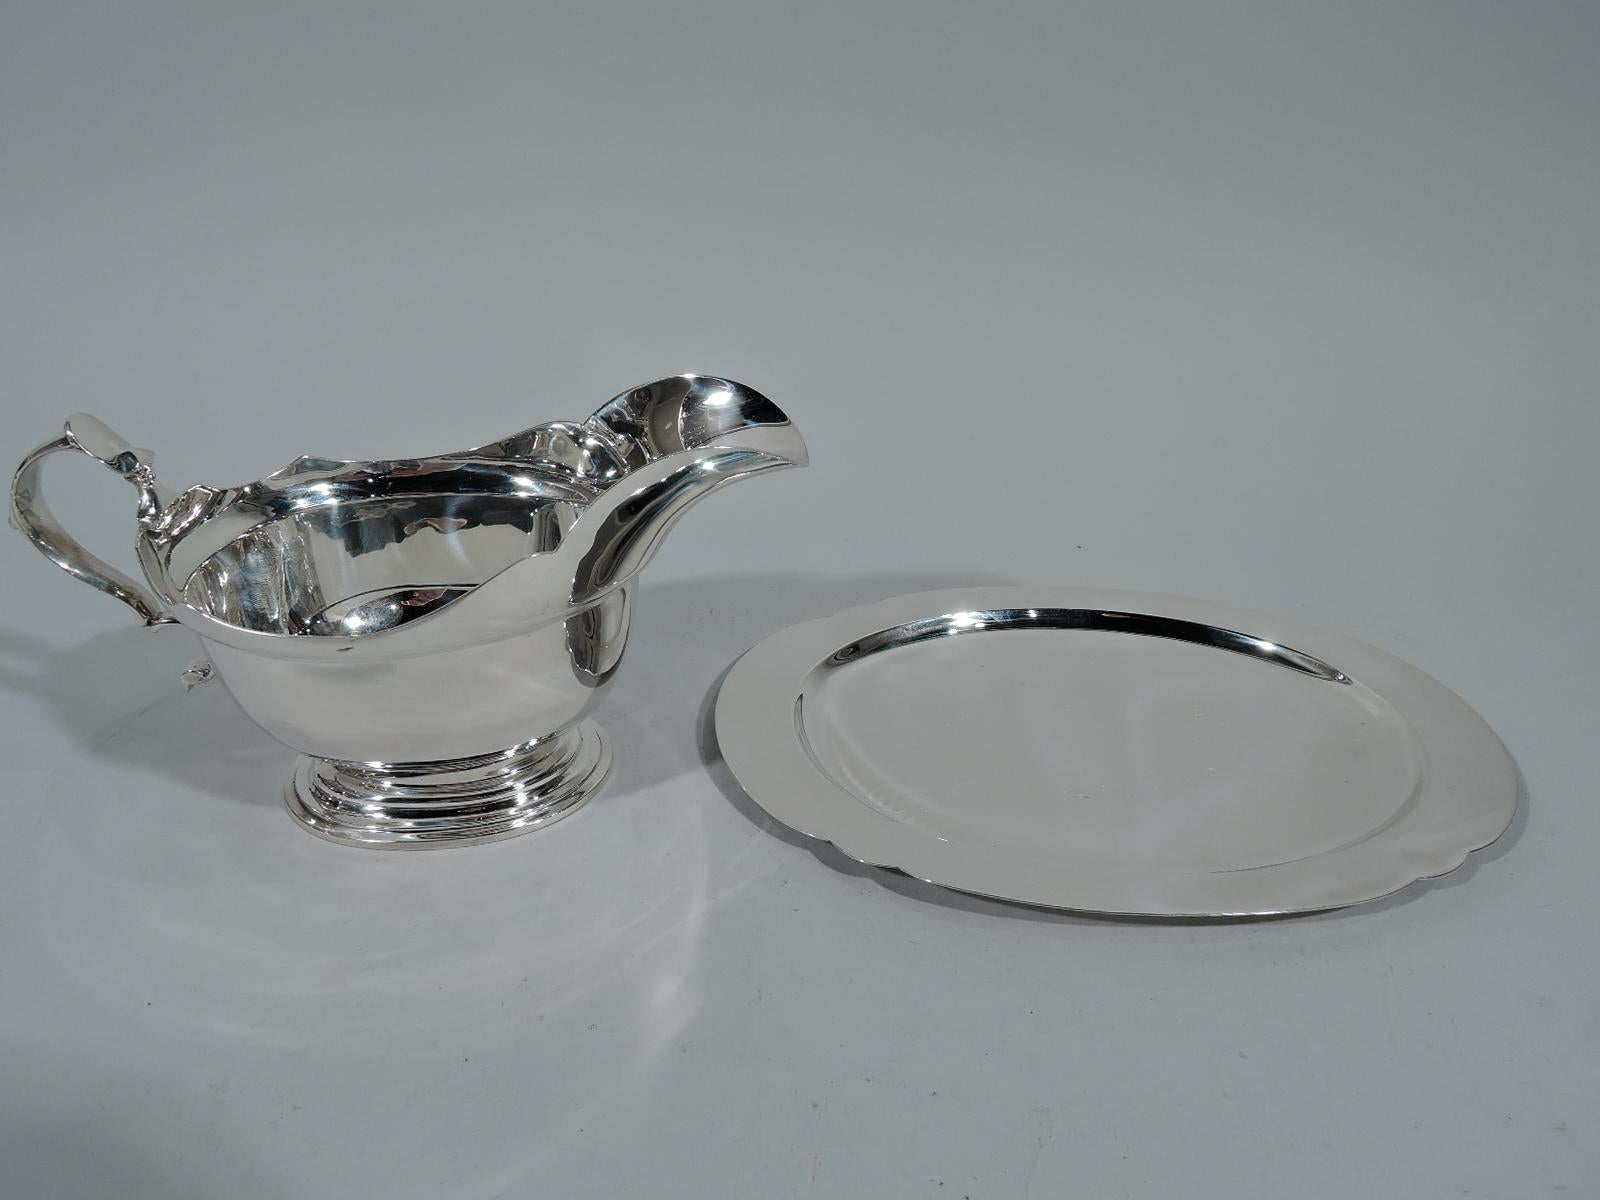 Georgian sterling silver gravy boat. Made by Tiffany & Co. in London in 1936. Traditional form with scalloped helmet mouth, leaf-capped double-scroll handle, and stepped oval foot. Hallmarked. Dimensions: H 3 3/4 x W 7 x D 3 5/8 in. Heavy weight: